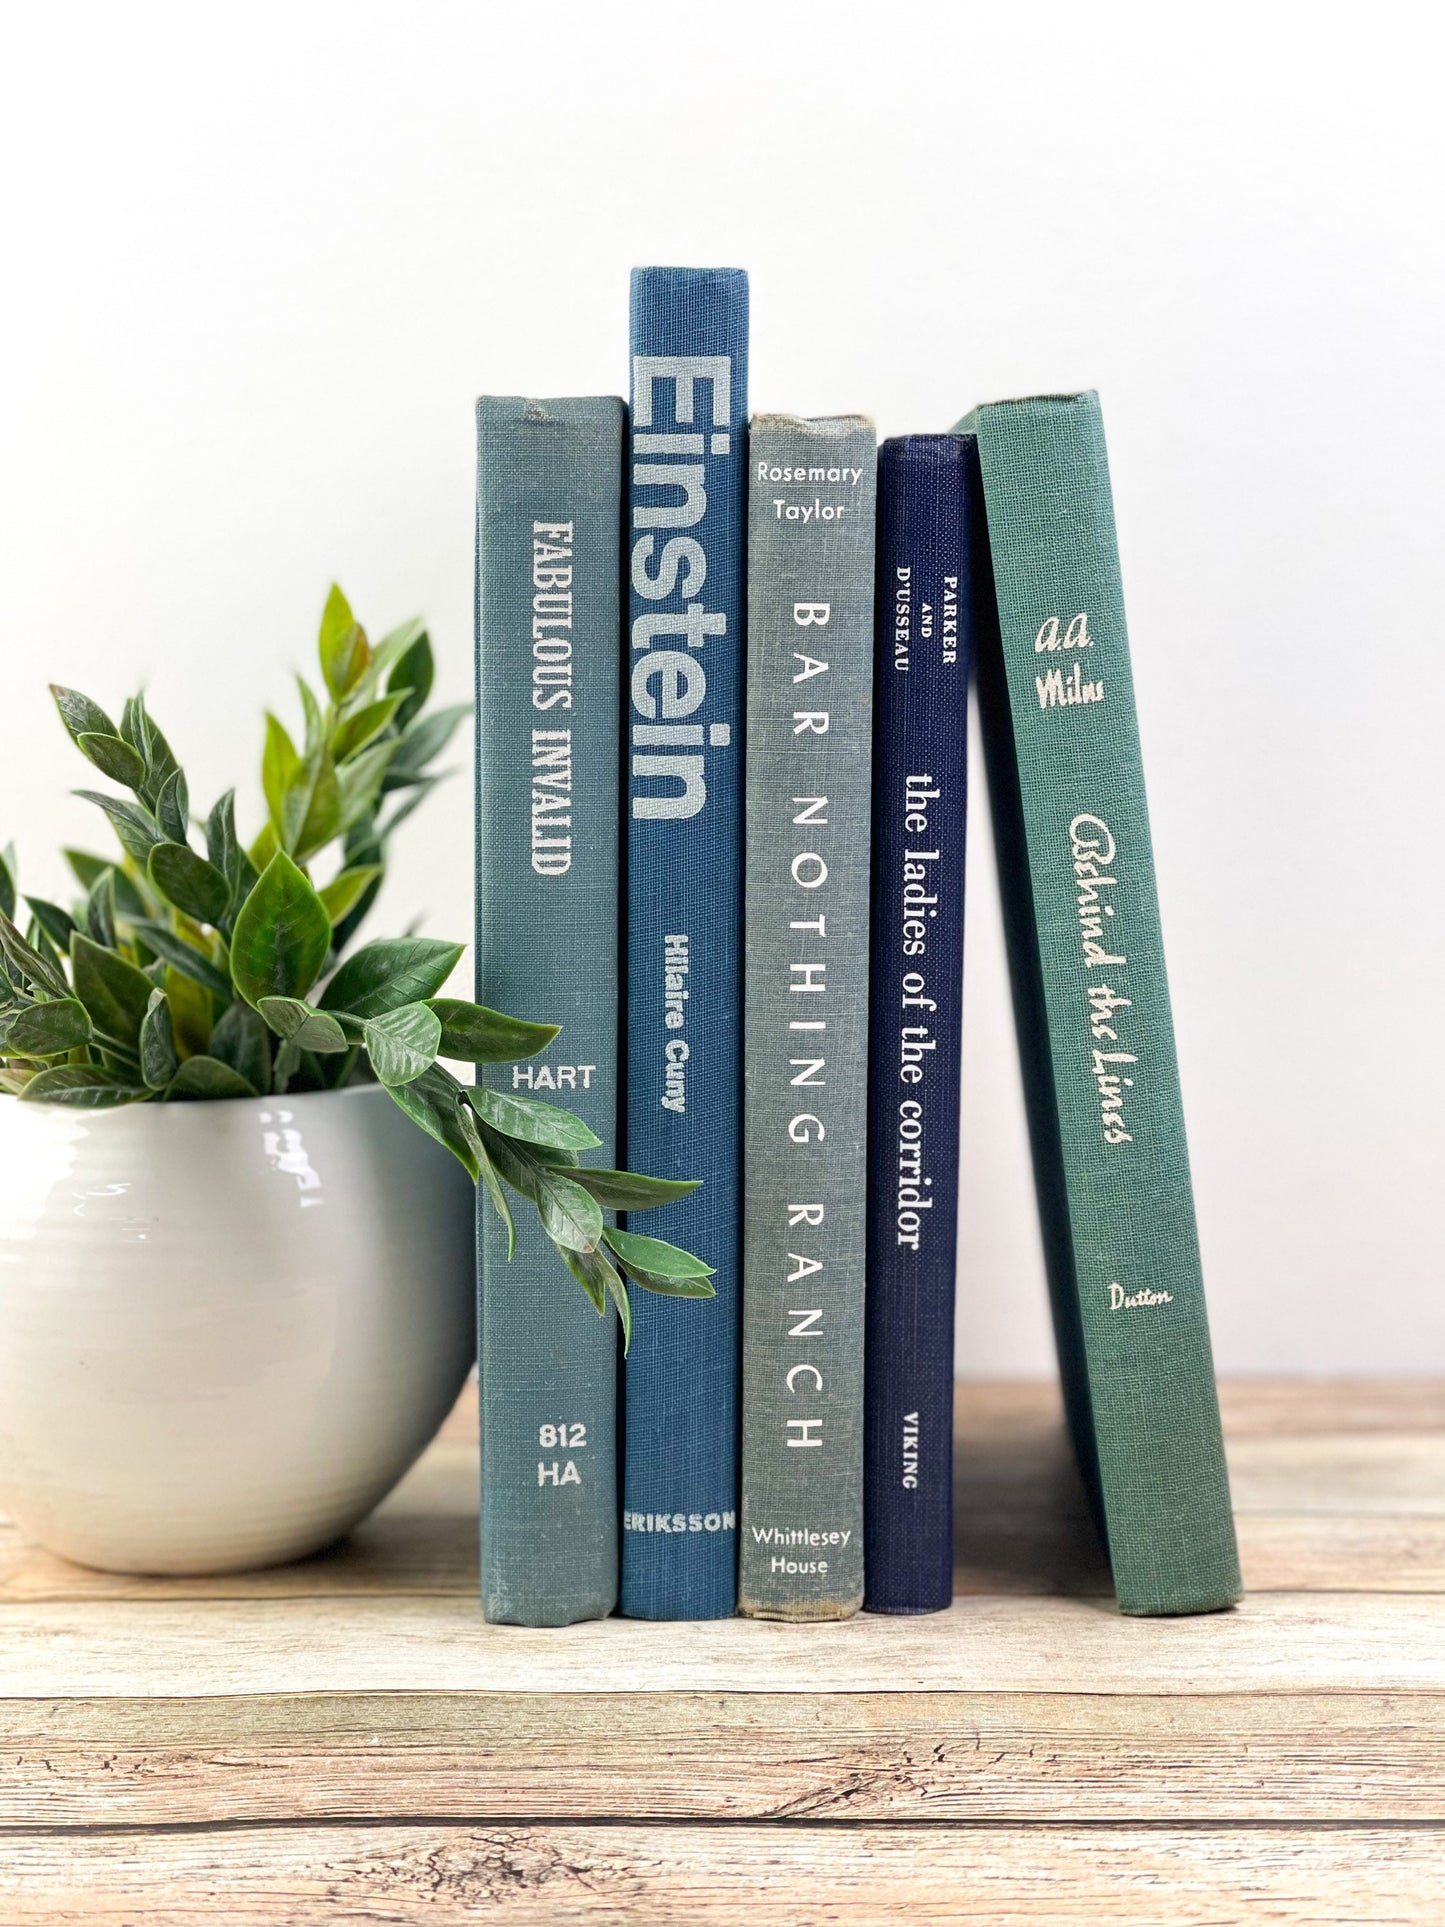 Staging Books for Home Decor